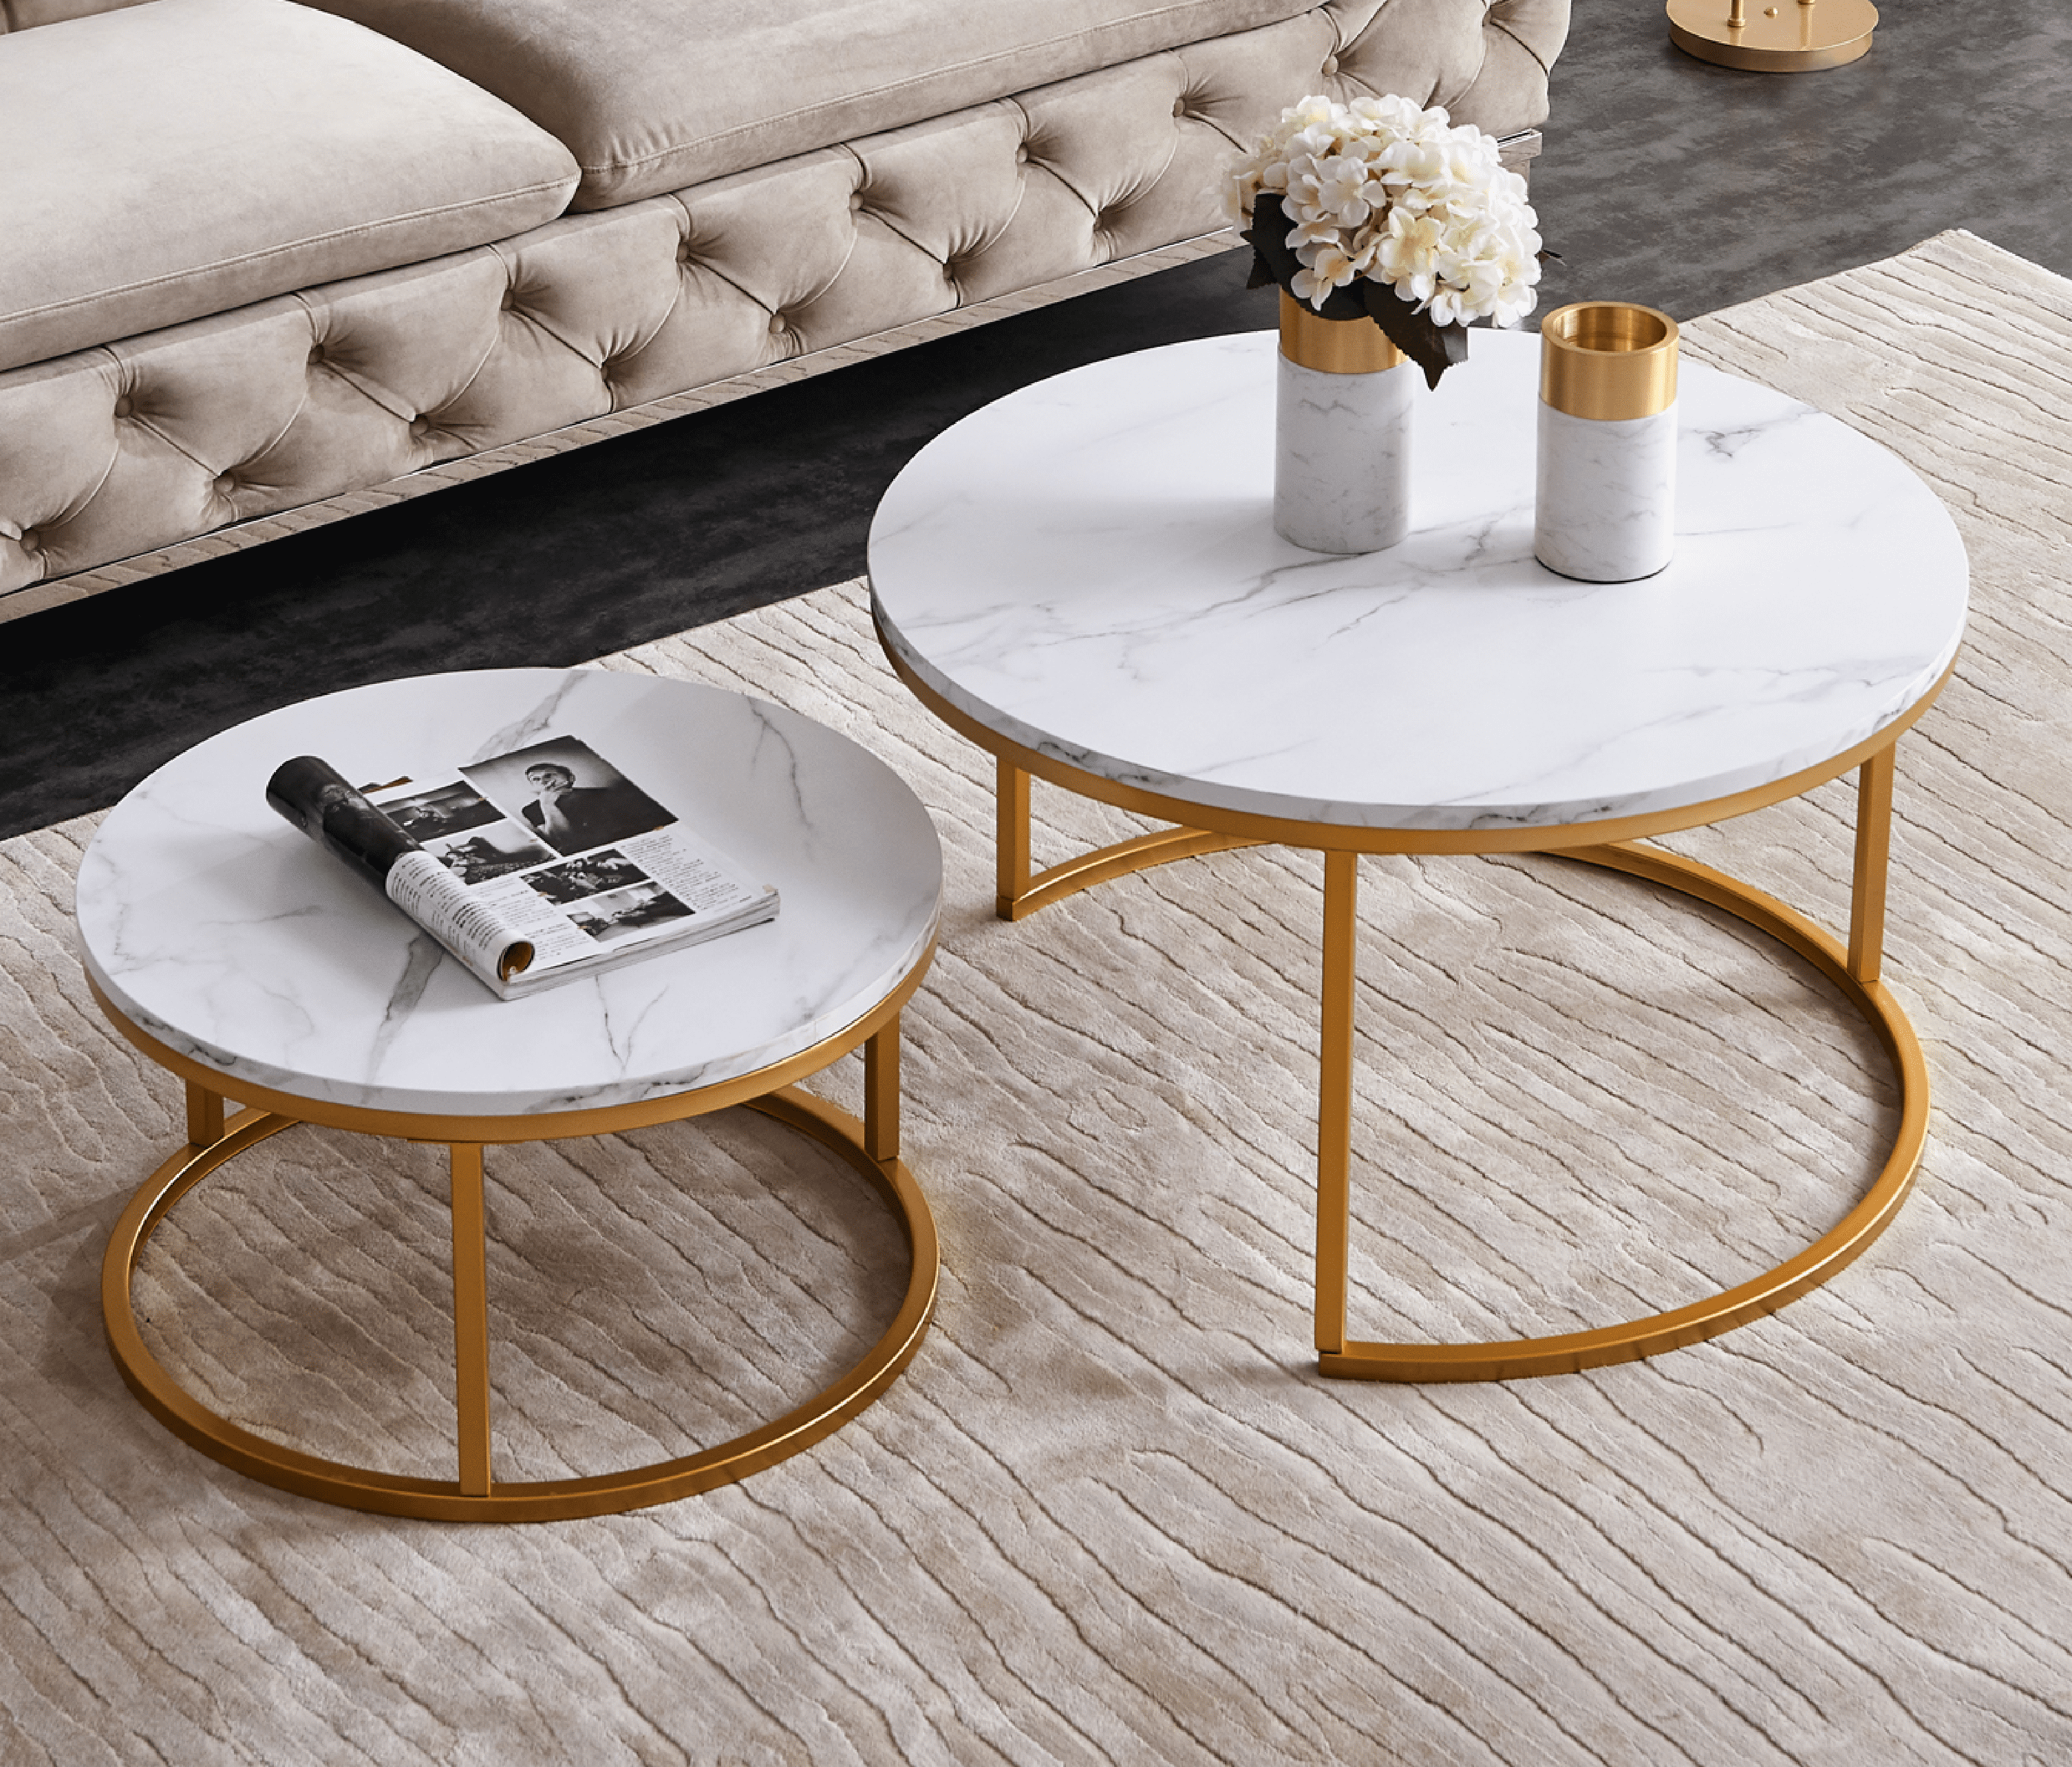 Knowlife Modern Nesting Coffee Table Round,Golden Color Frame with Marble Pattern Wood 32” 